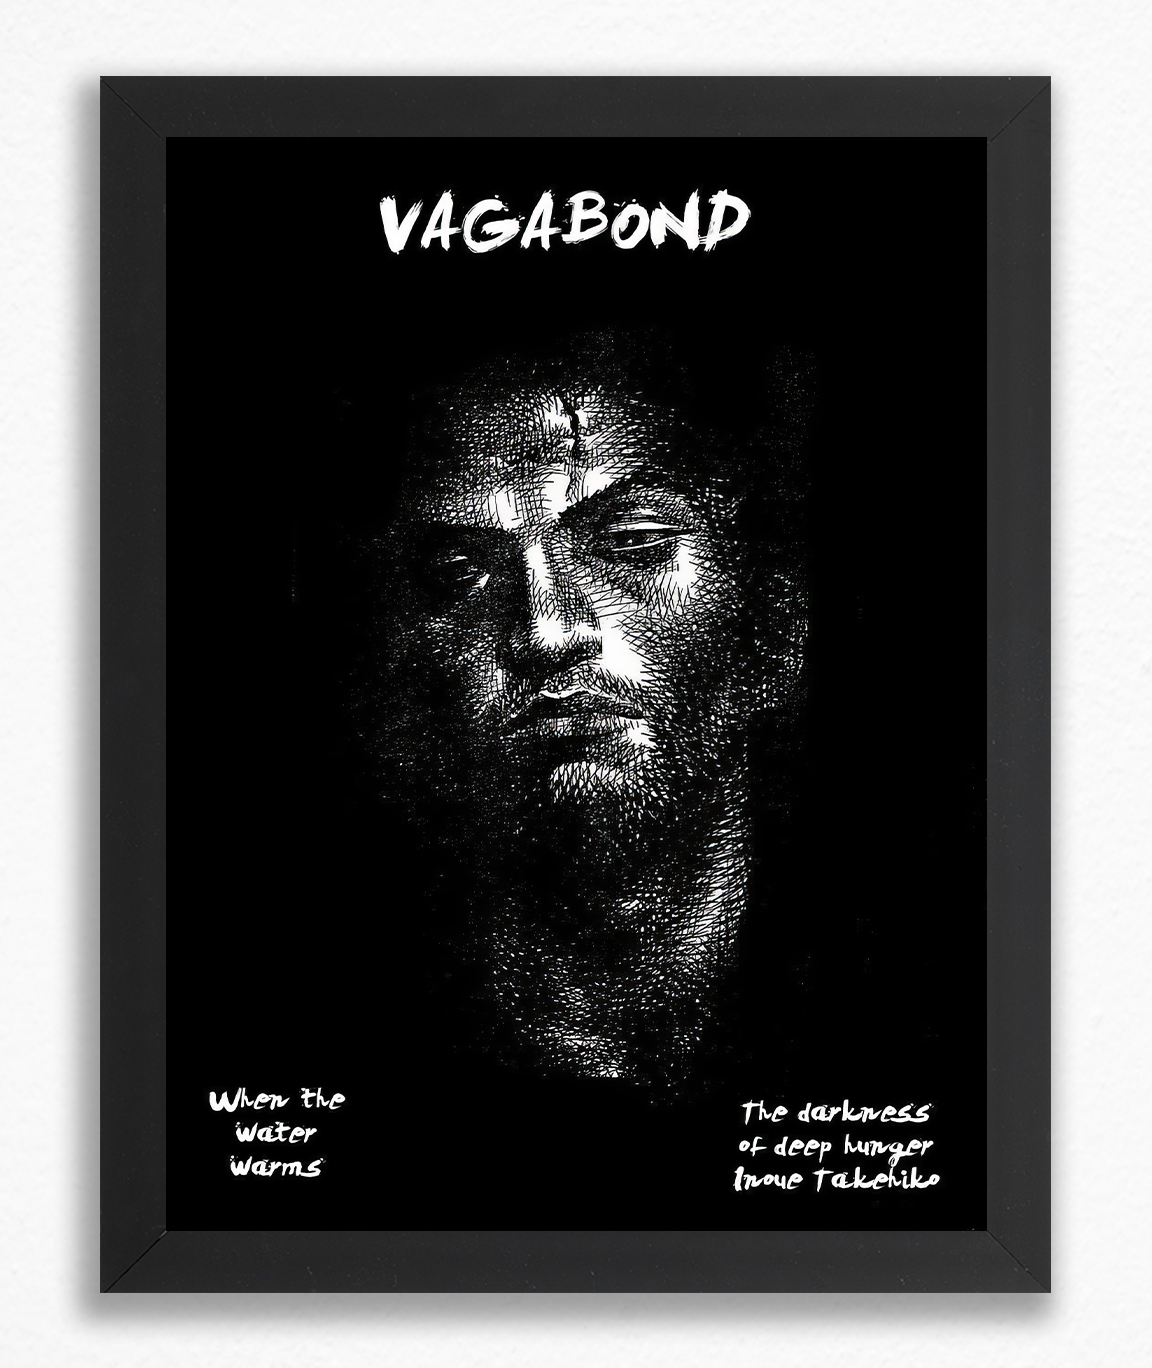 The darkness of the deep hunger - Vagabond